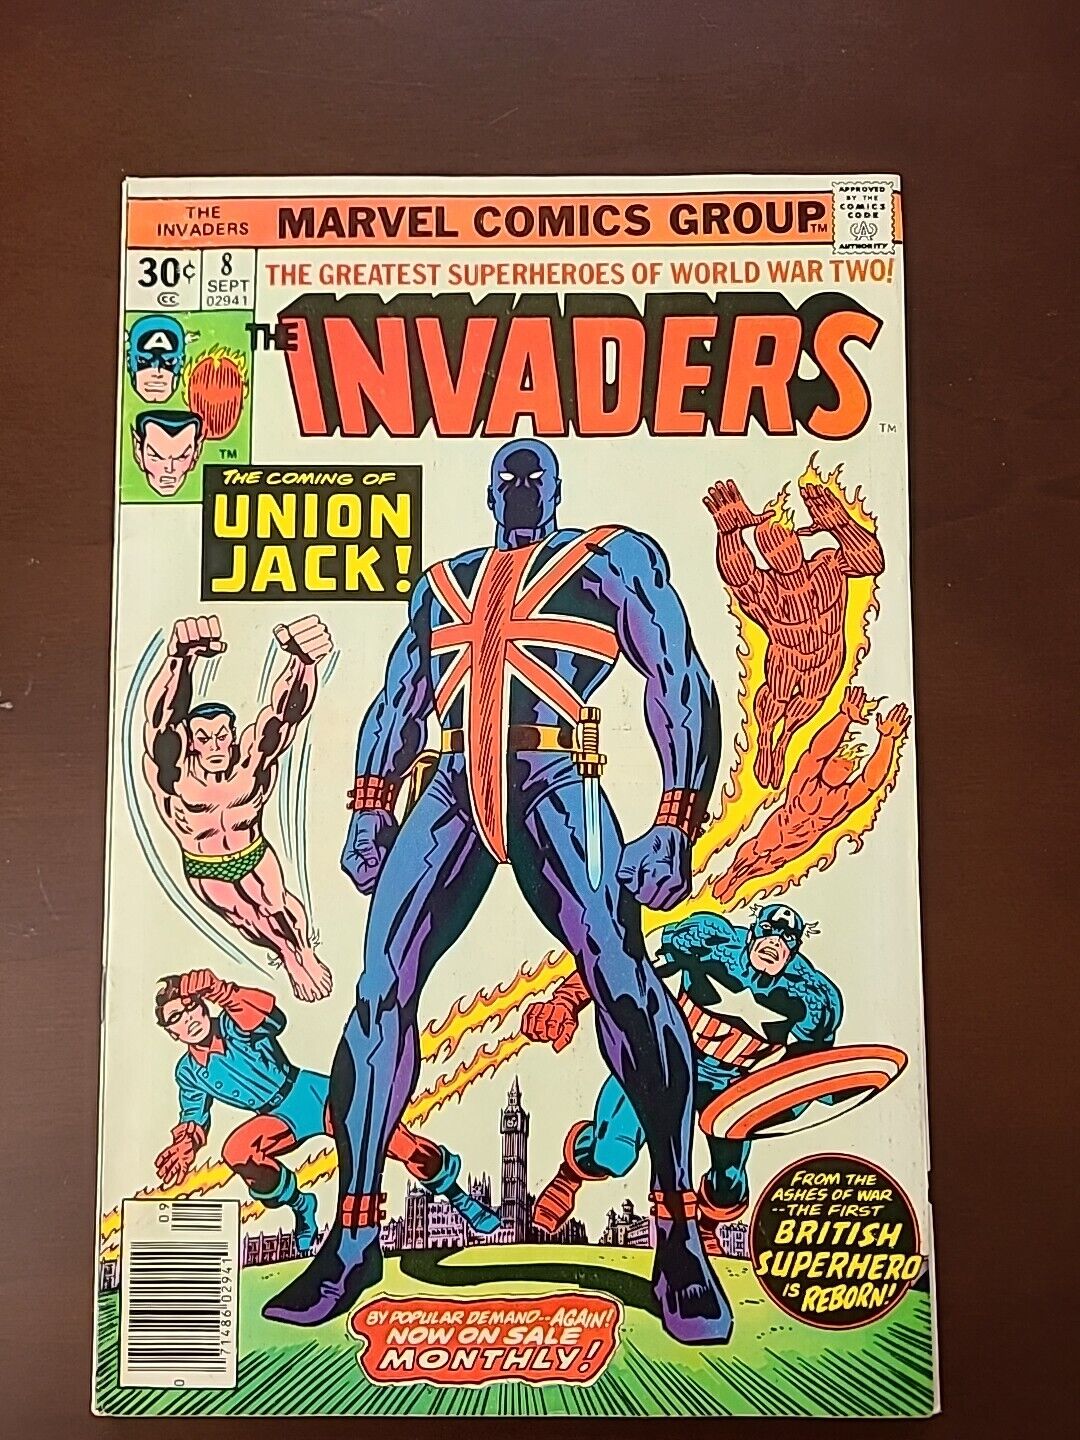 VINTAGE MARVEL COMICS THE INVADERS ISSUE 8 With Bag and Board